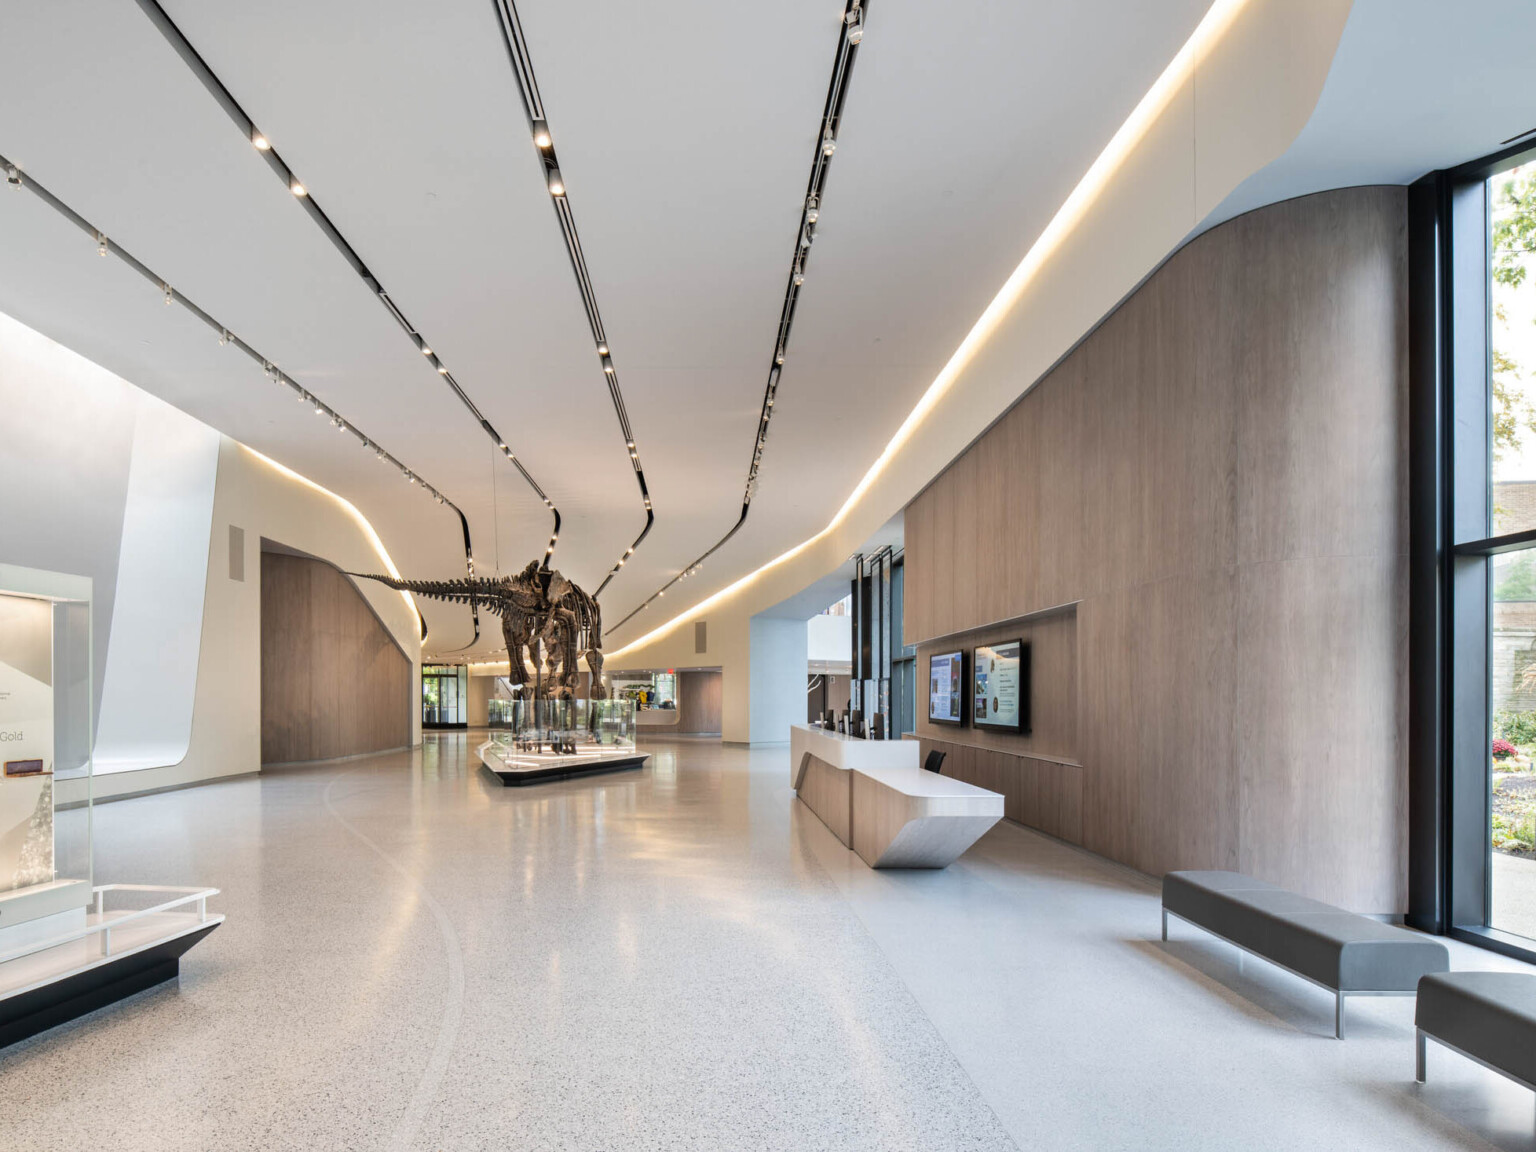 Interior view of a gallery hallway, white striped dimensional ceiling design with a dinosaur skeleton